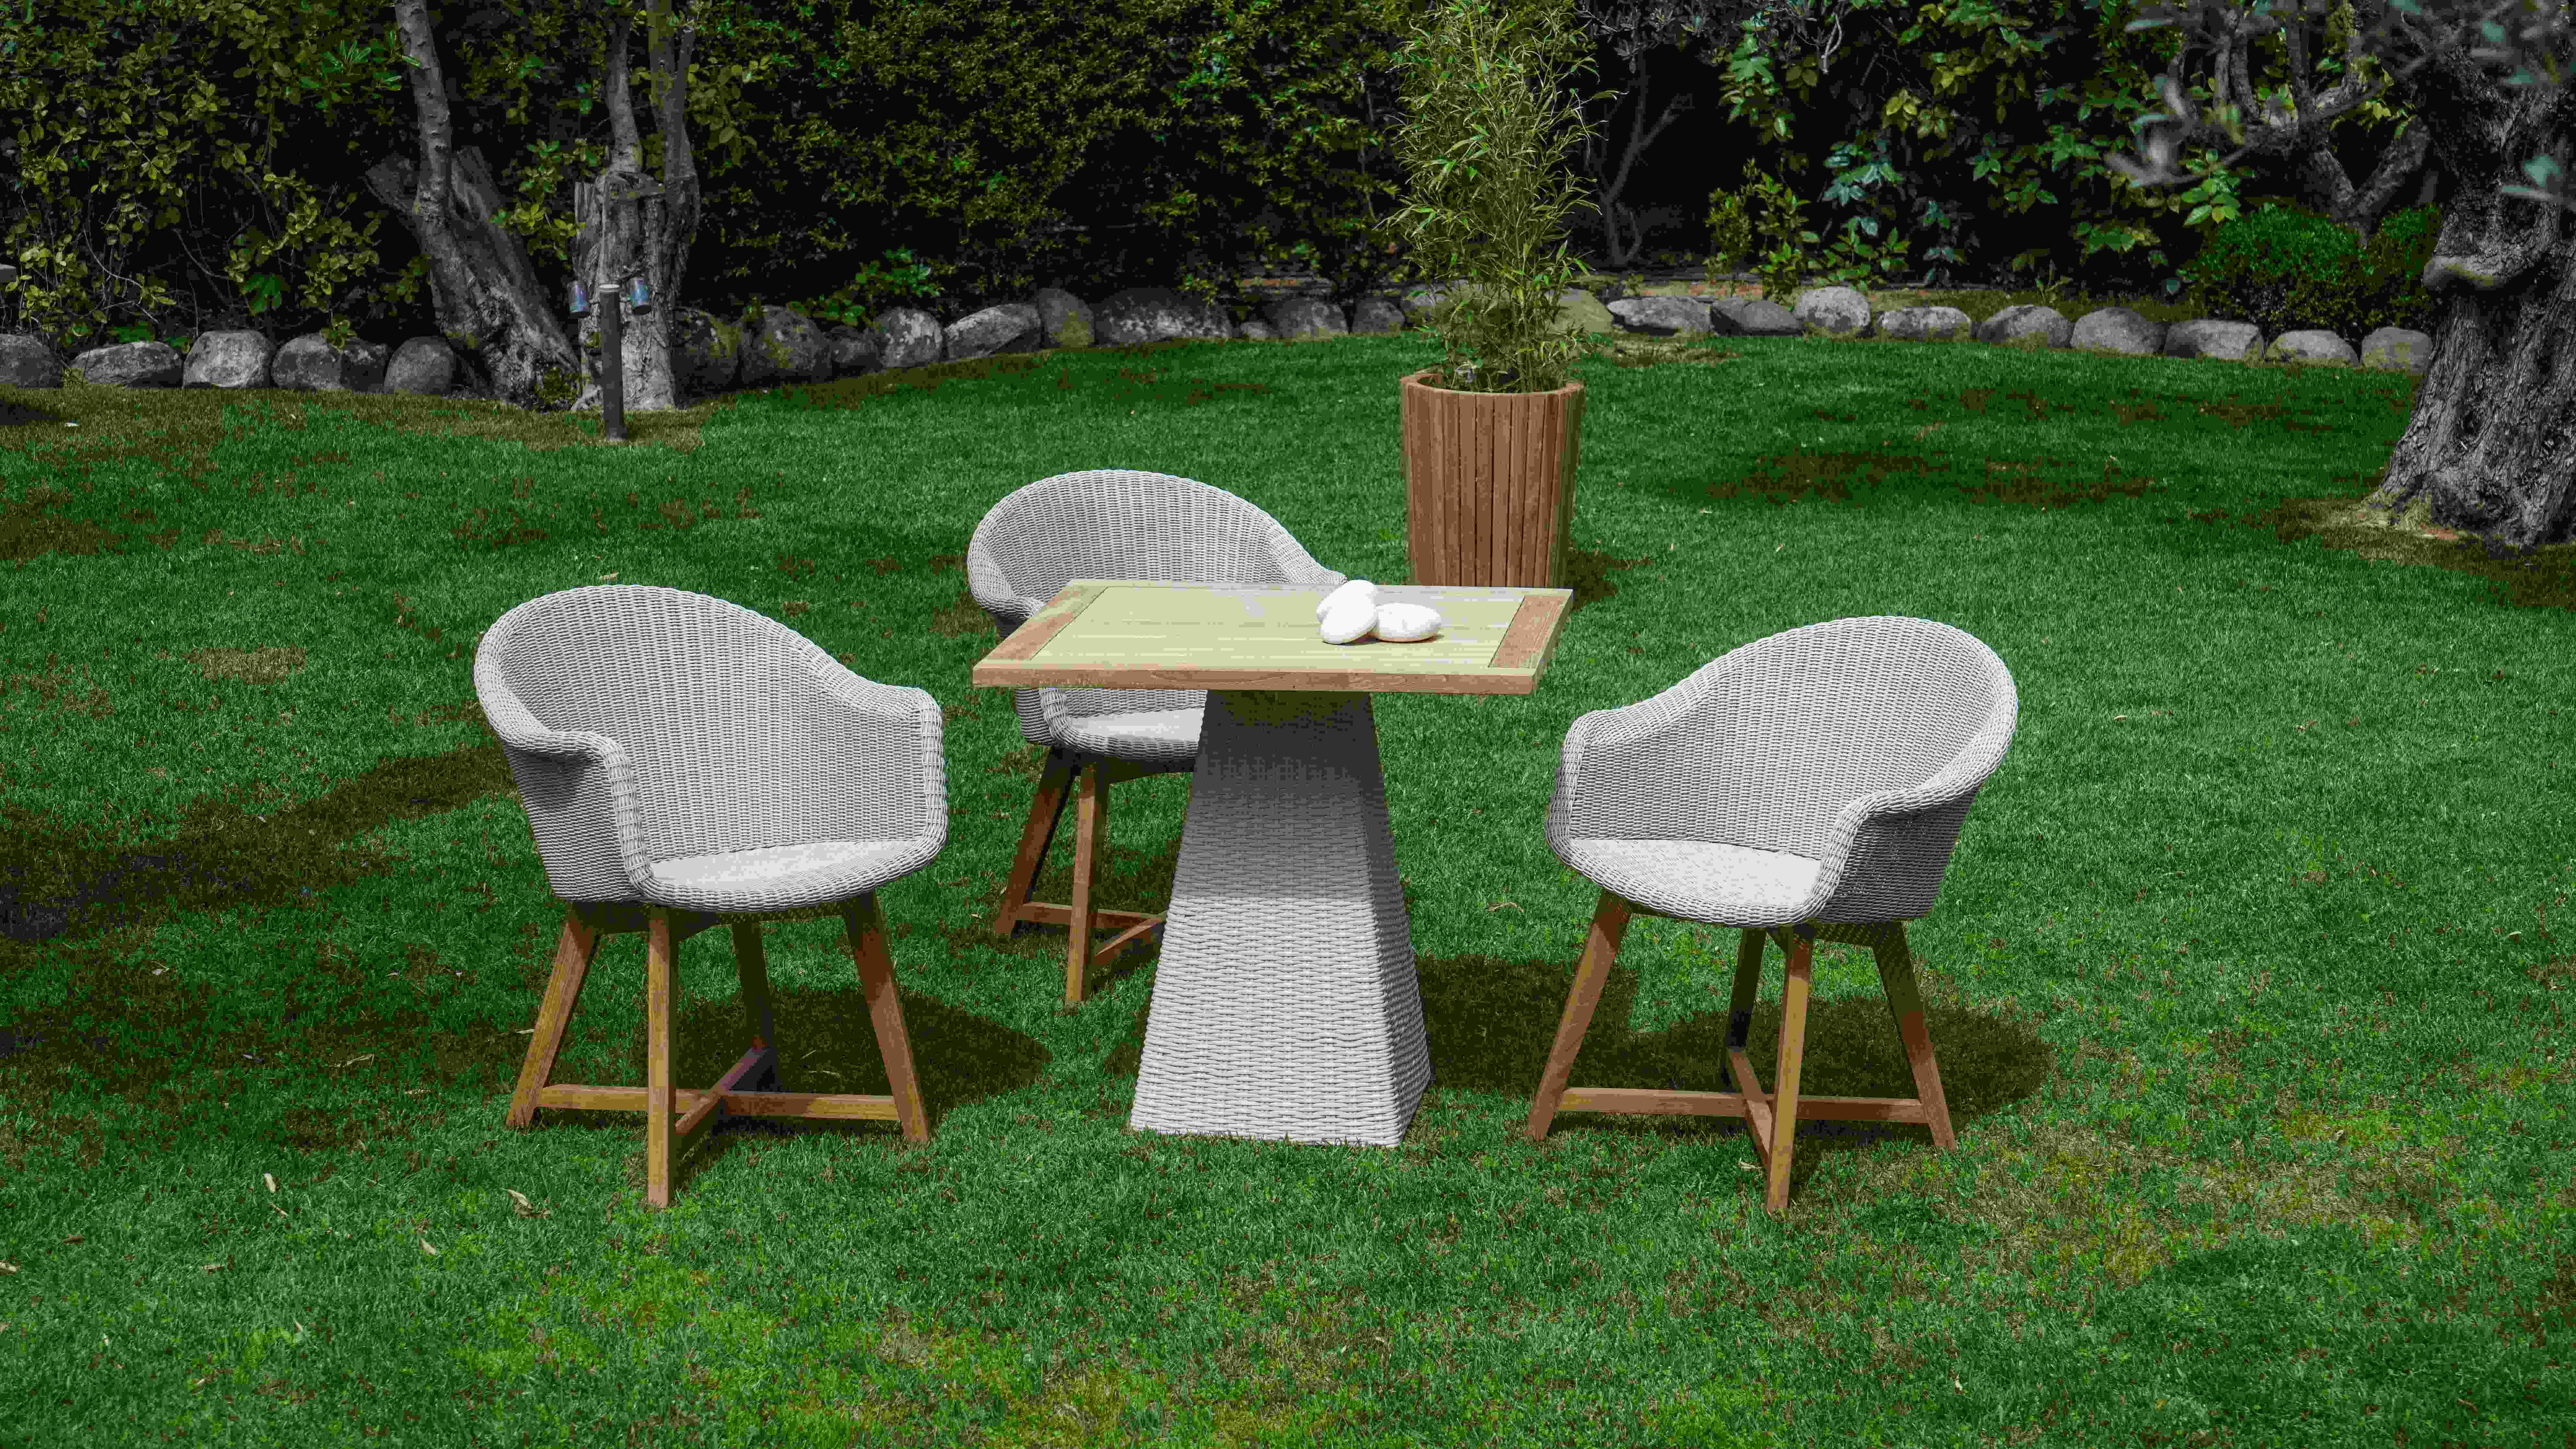 Gorgeous Backyard Collections Patio Furniture Extraordinary throughout proportions 7952 X 4472